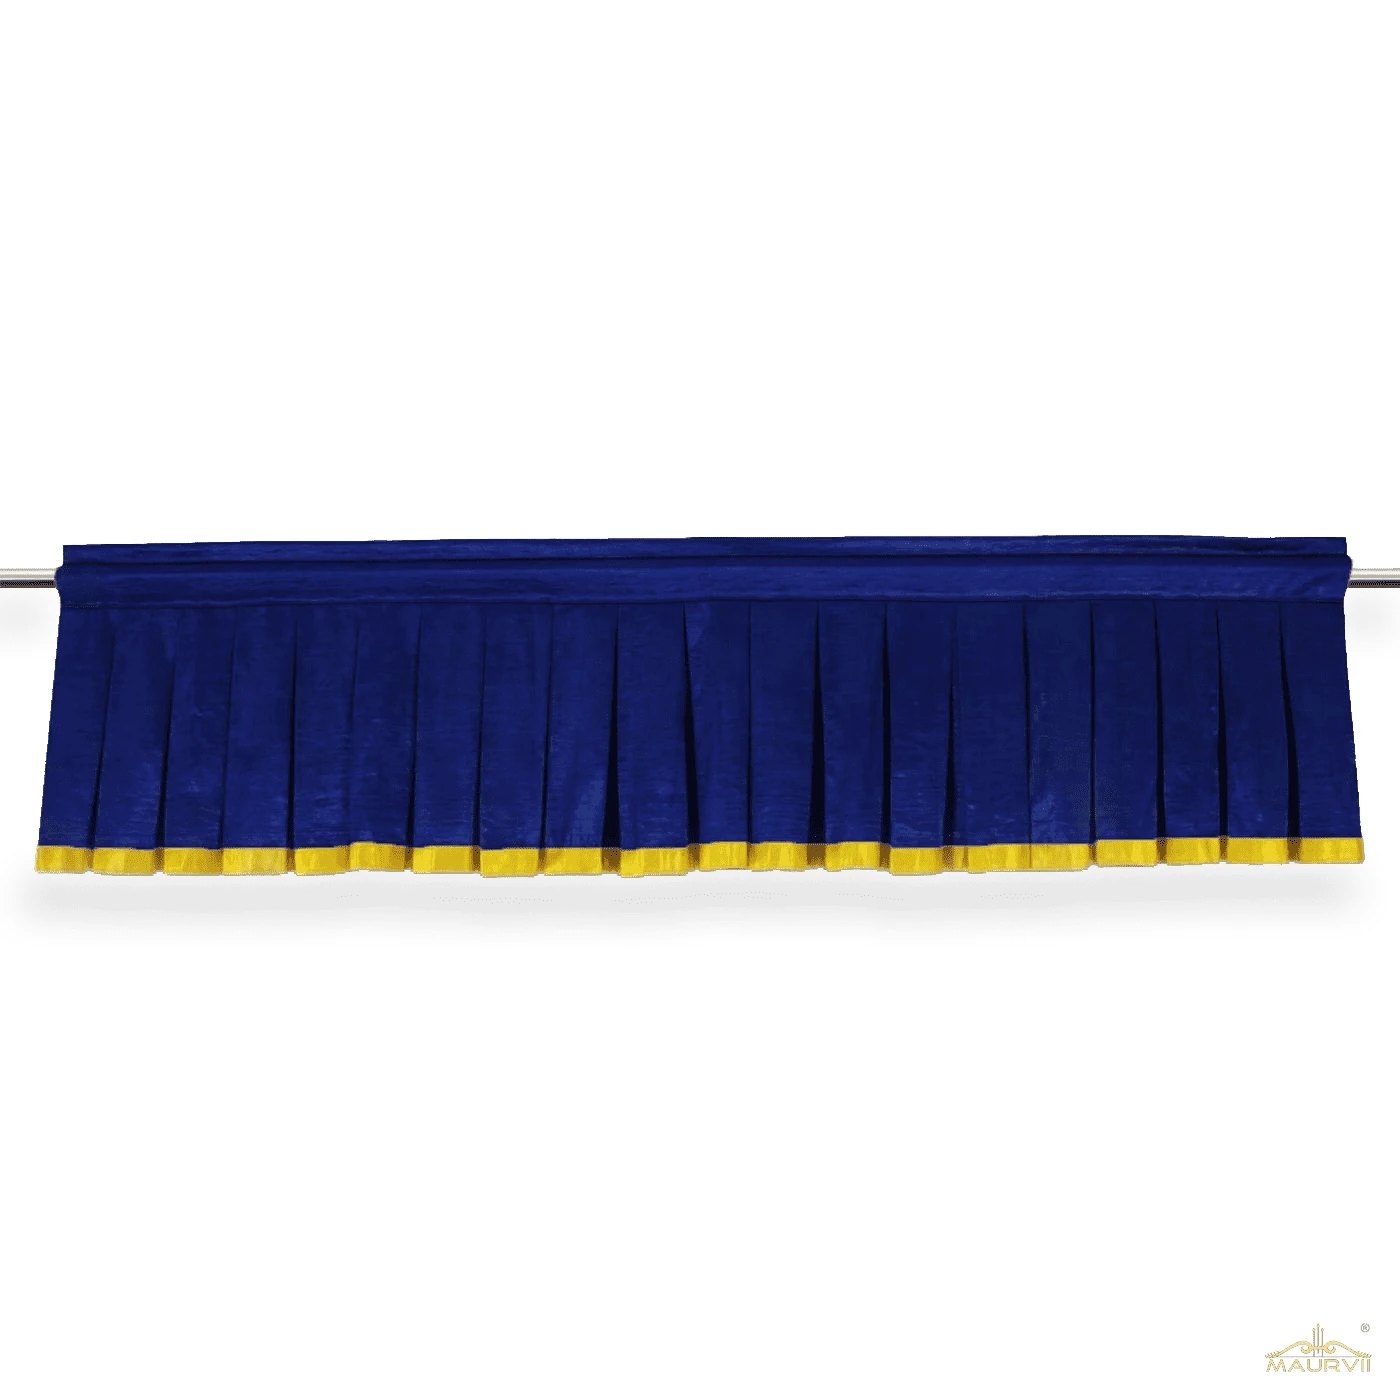 Box Pleated Valance For Wide Windows